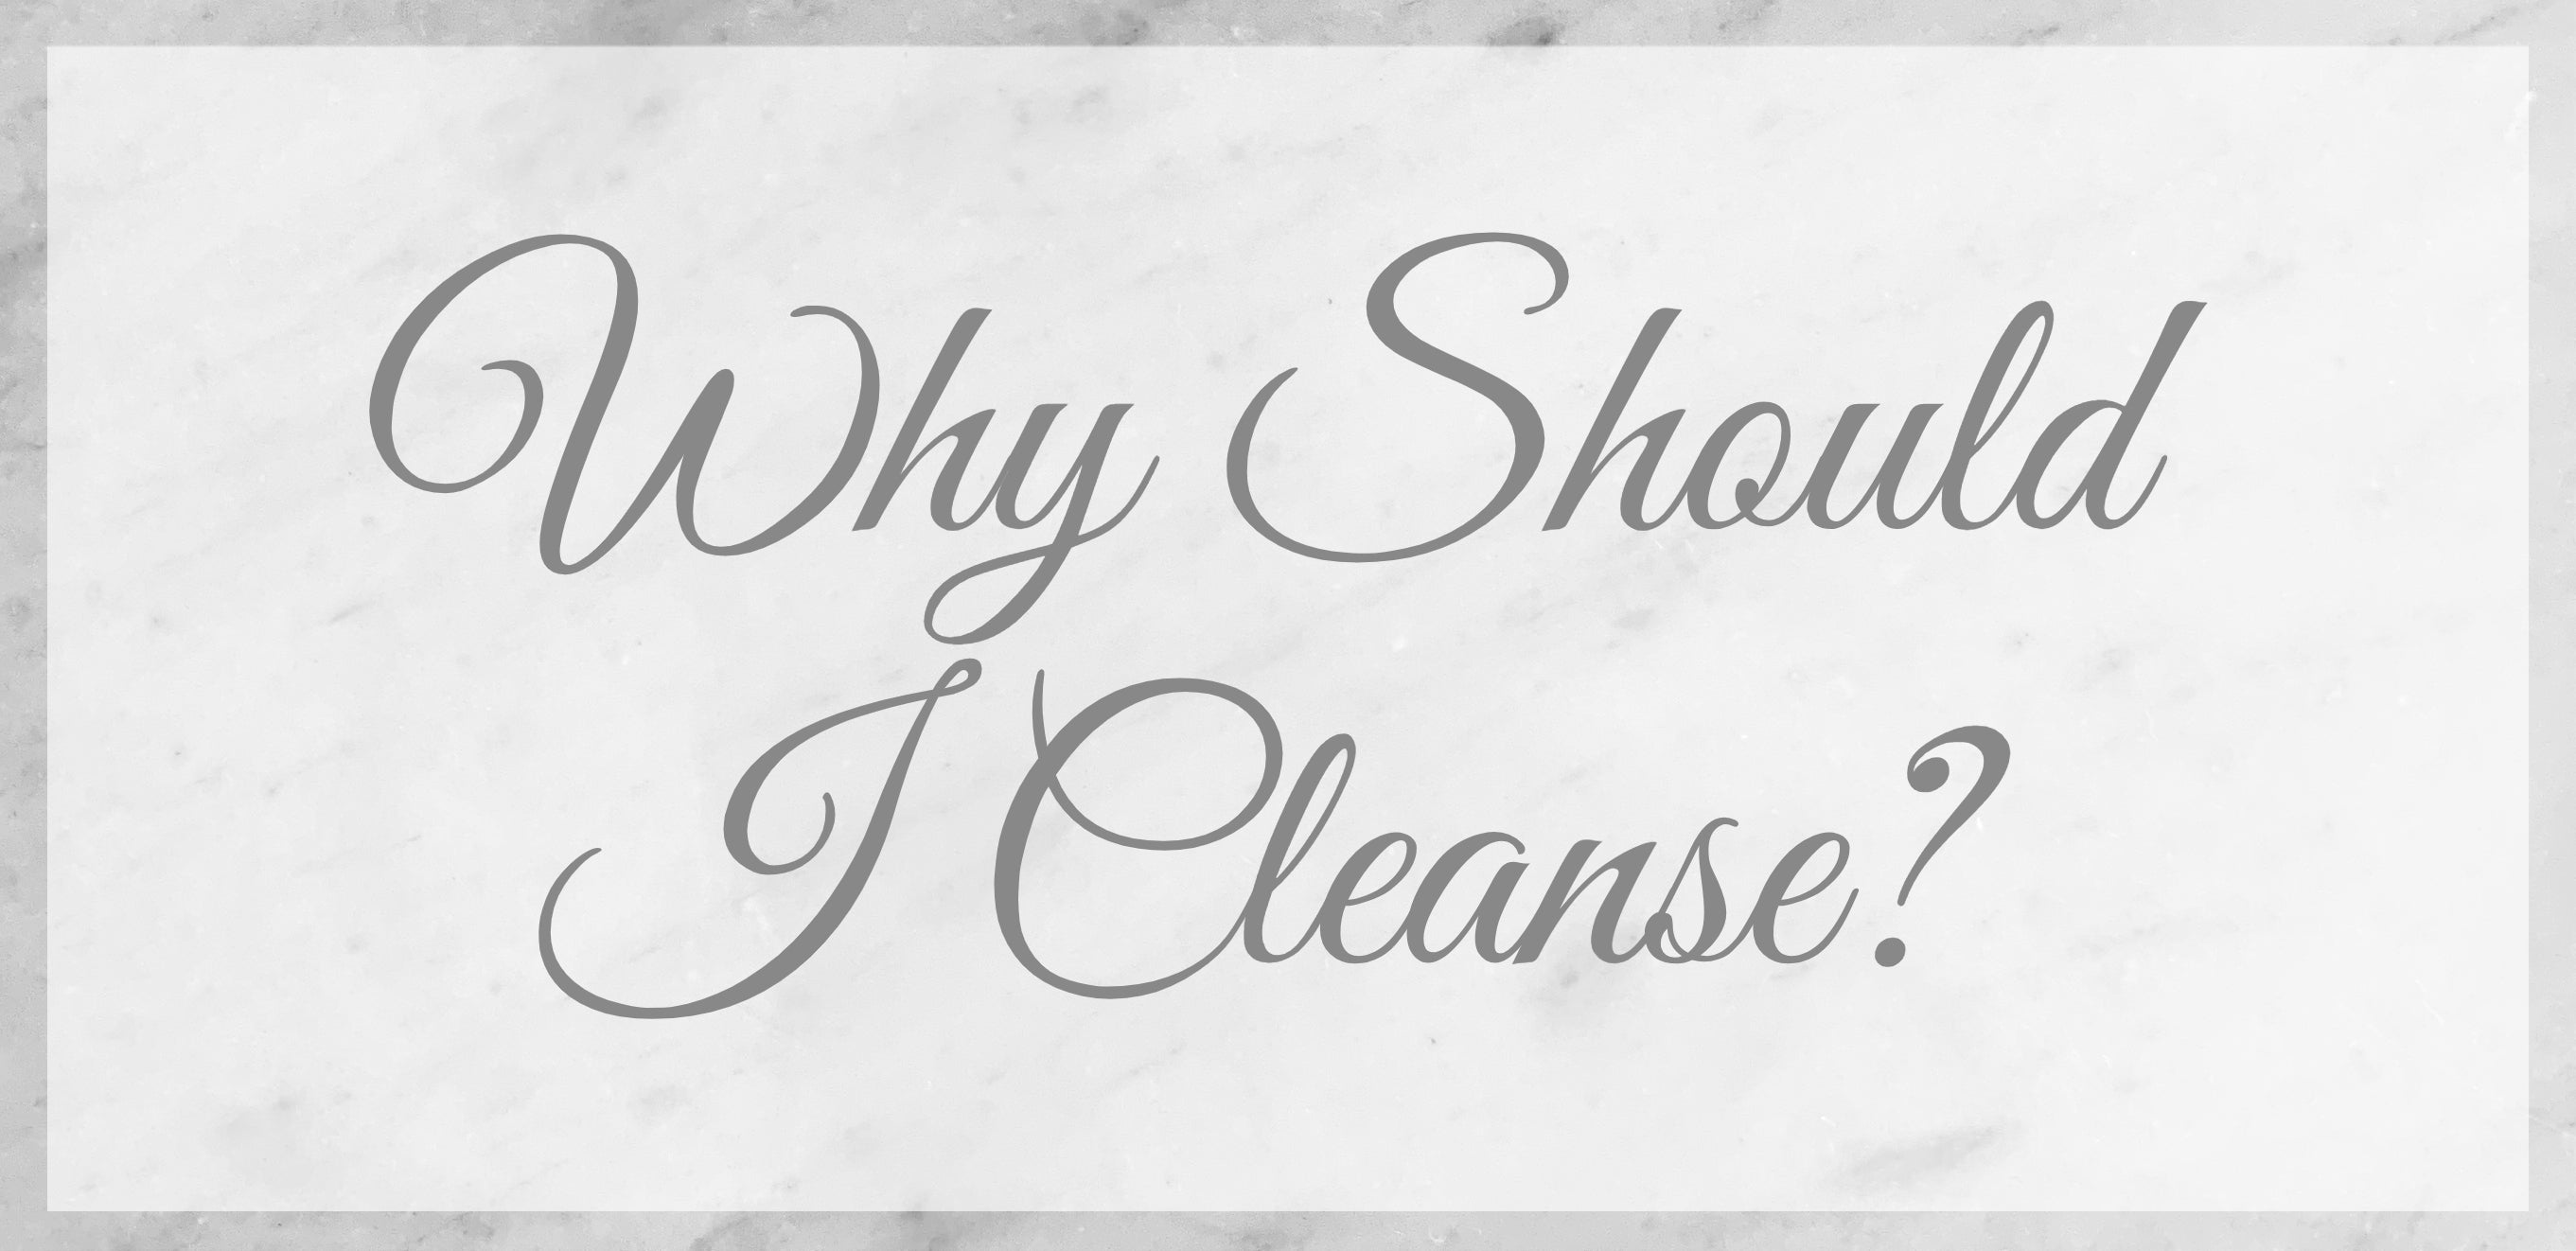 Why Should I Cleanse?